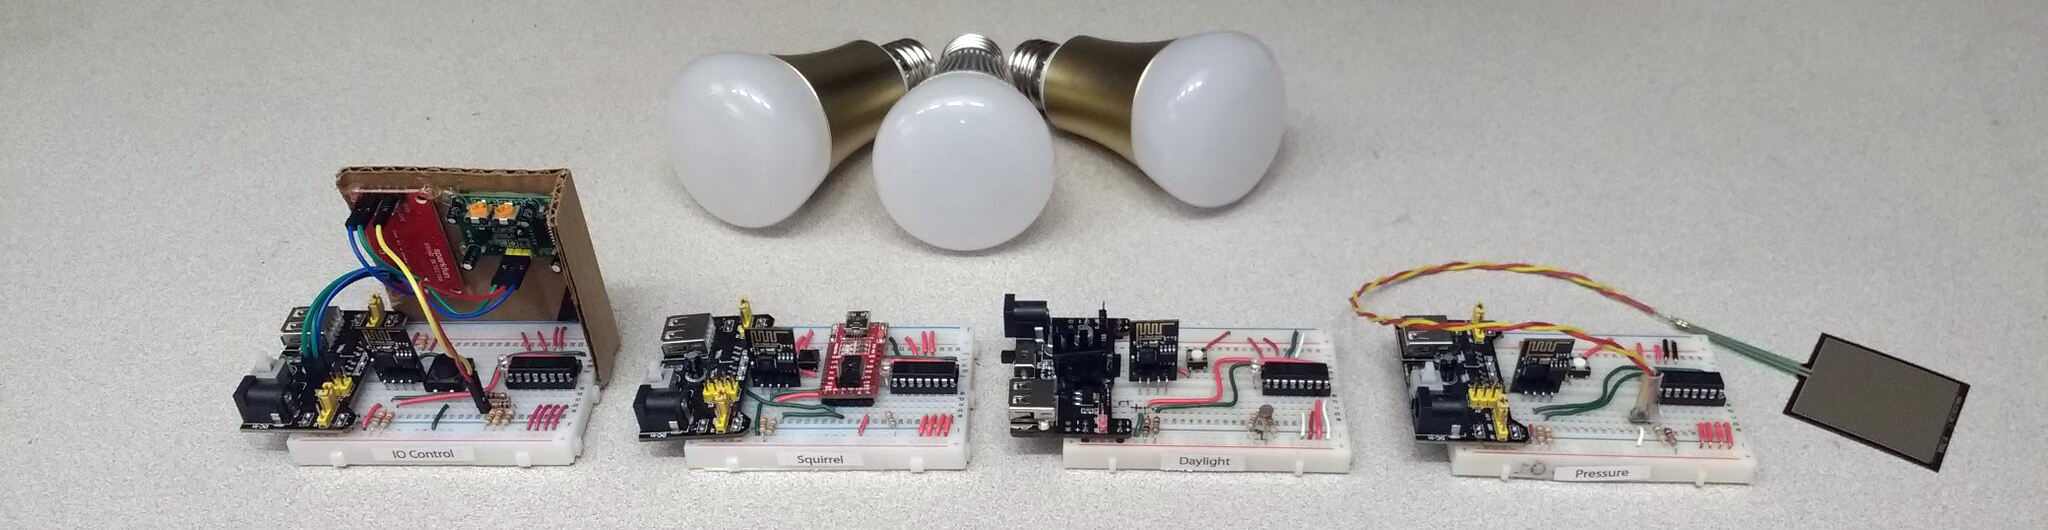 A promotional shot of Squirrel, an ESP8266-based Wi-Fi light controller